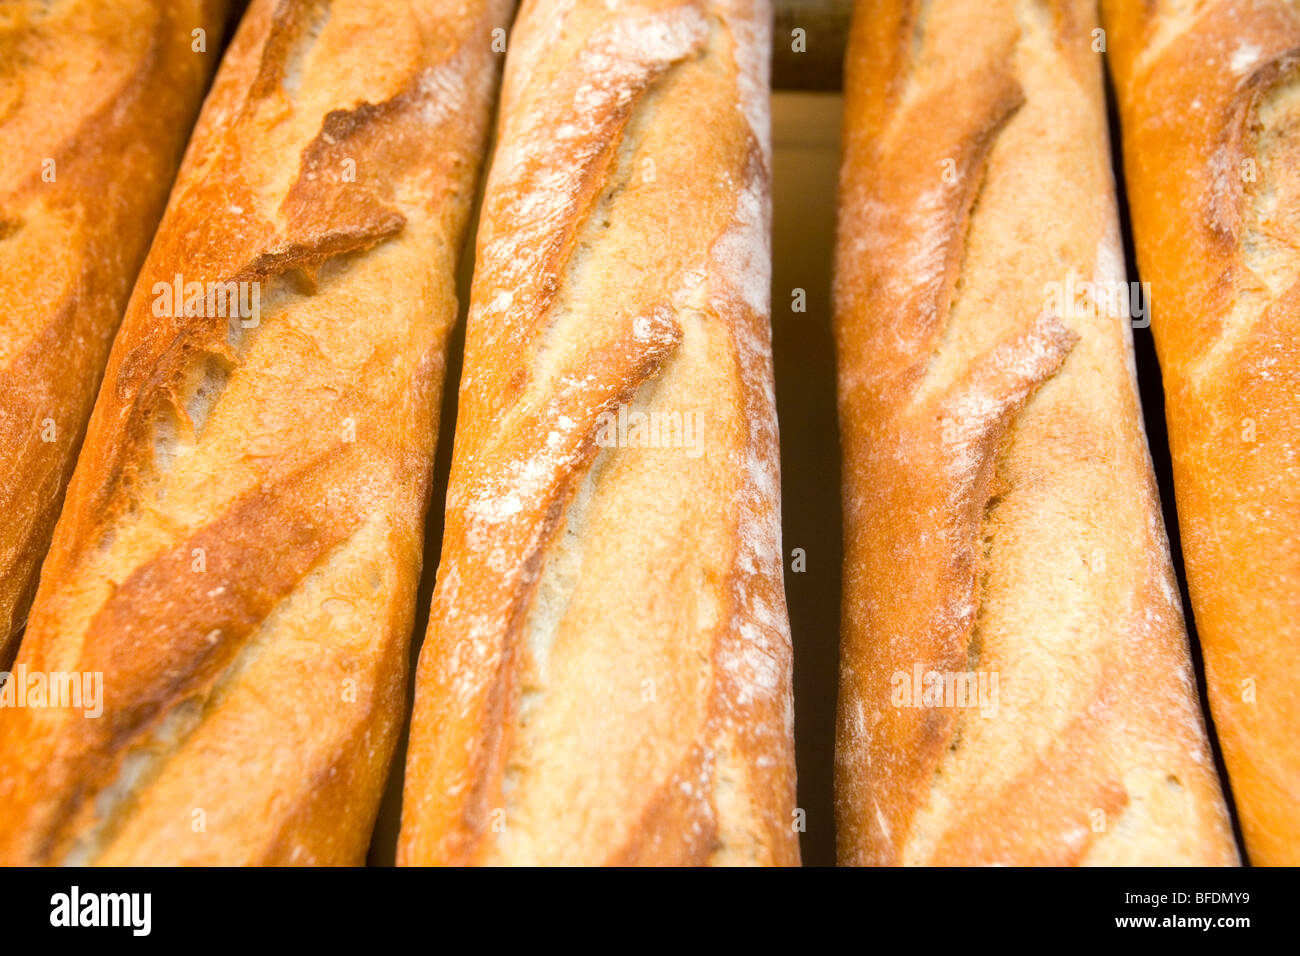 A bunch of Loaves of bread. Stock Photo